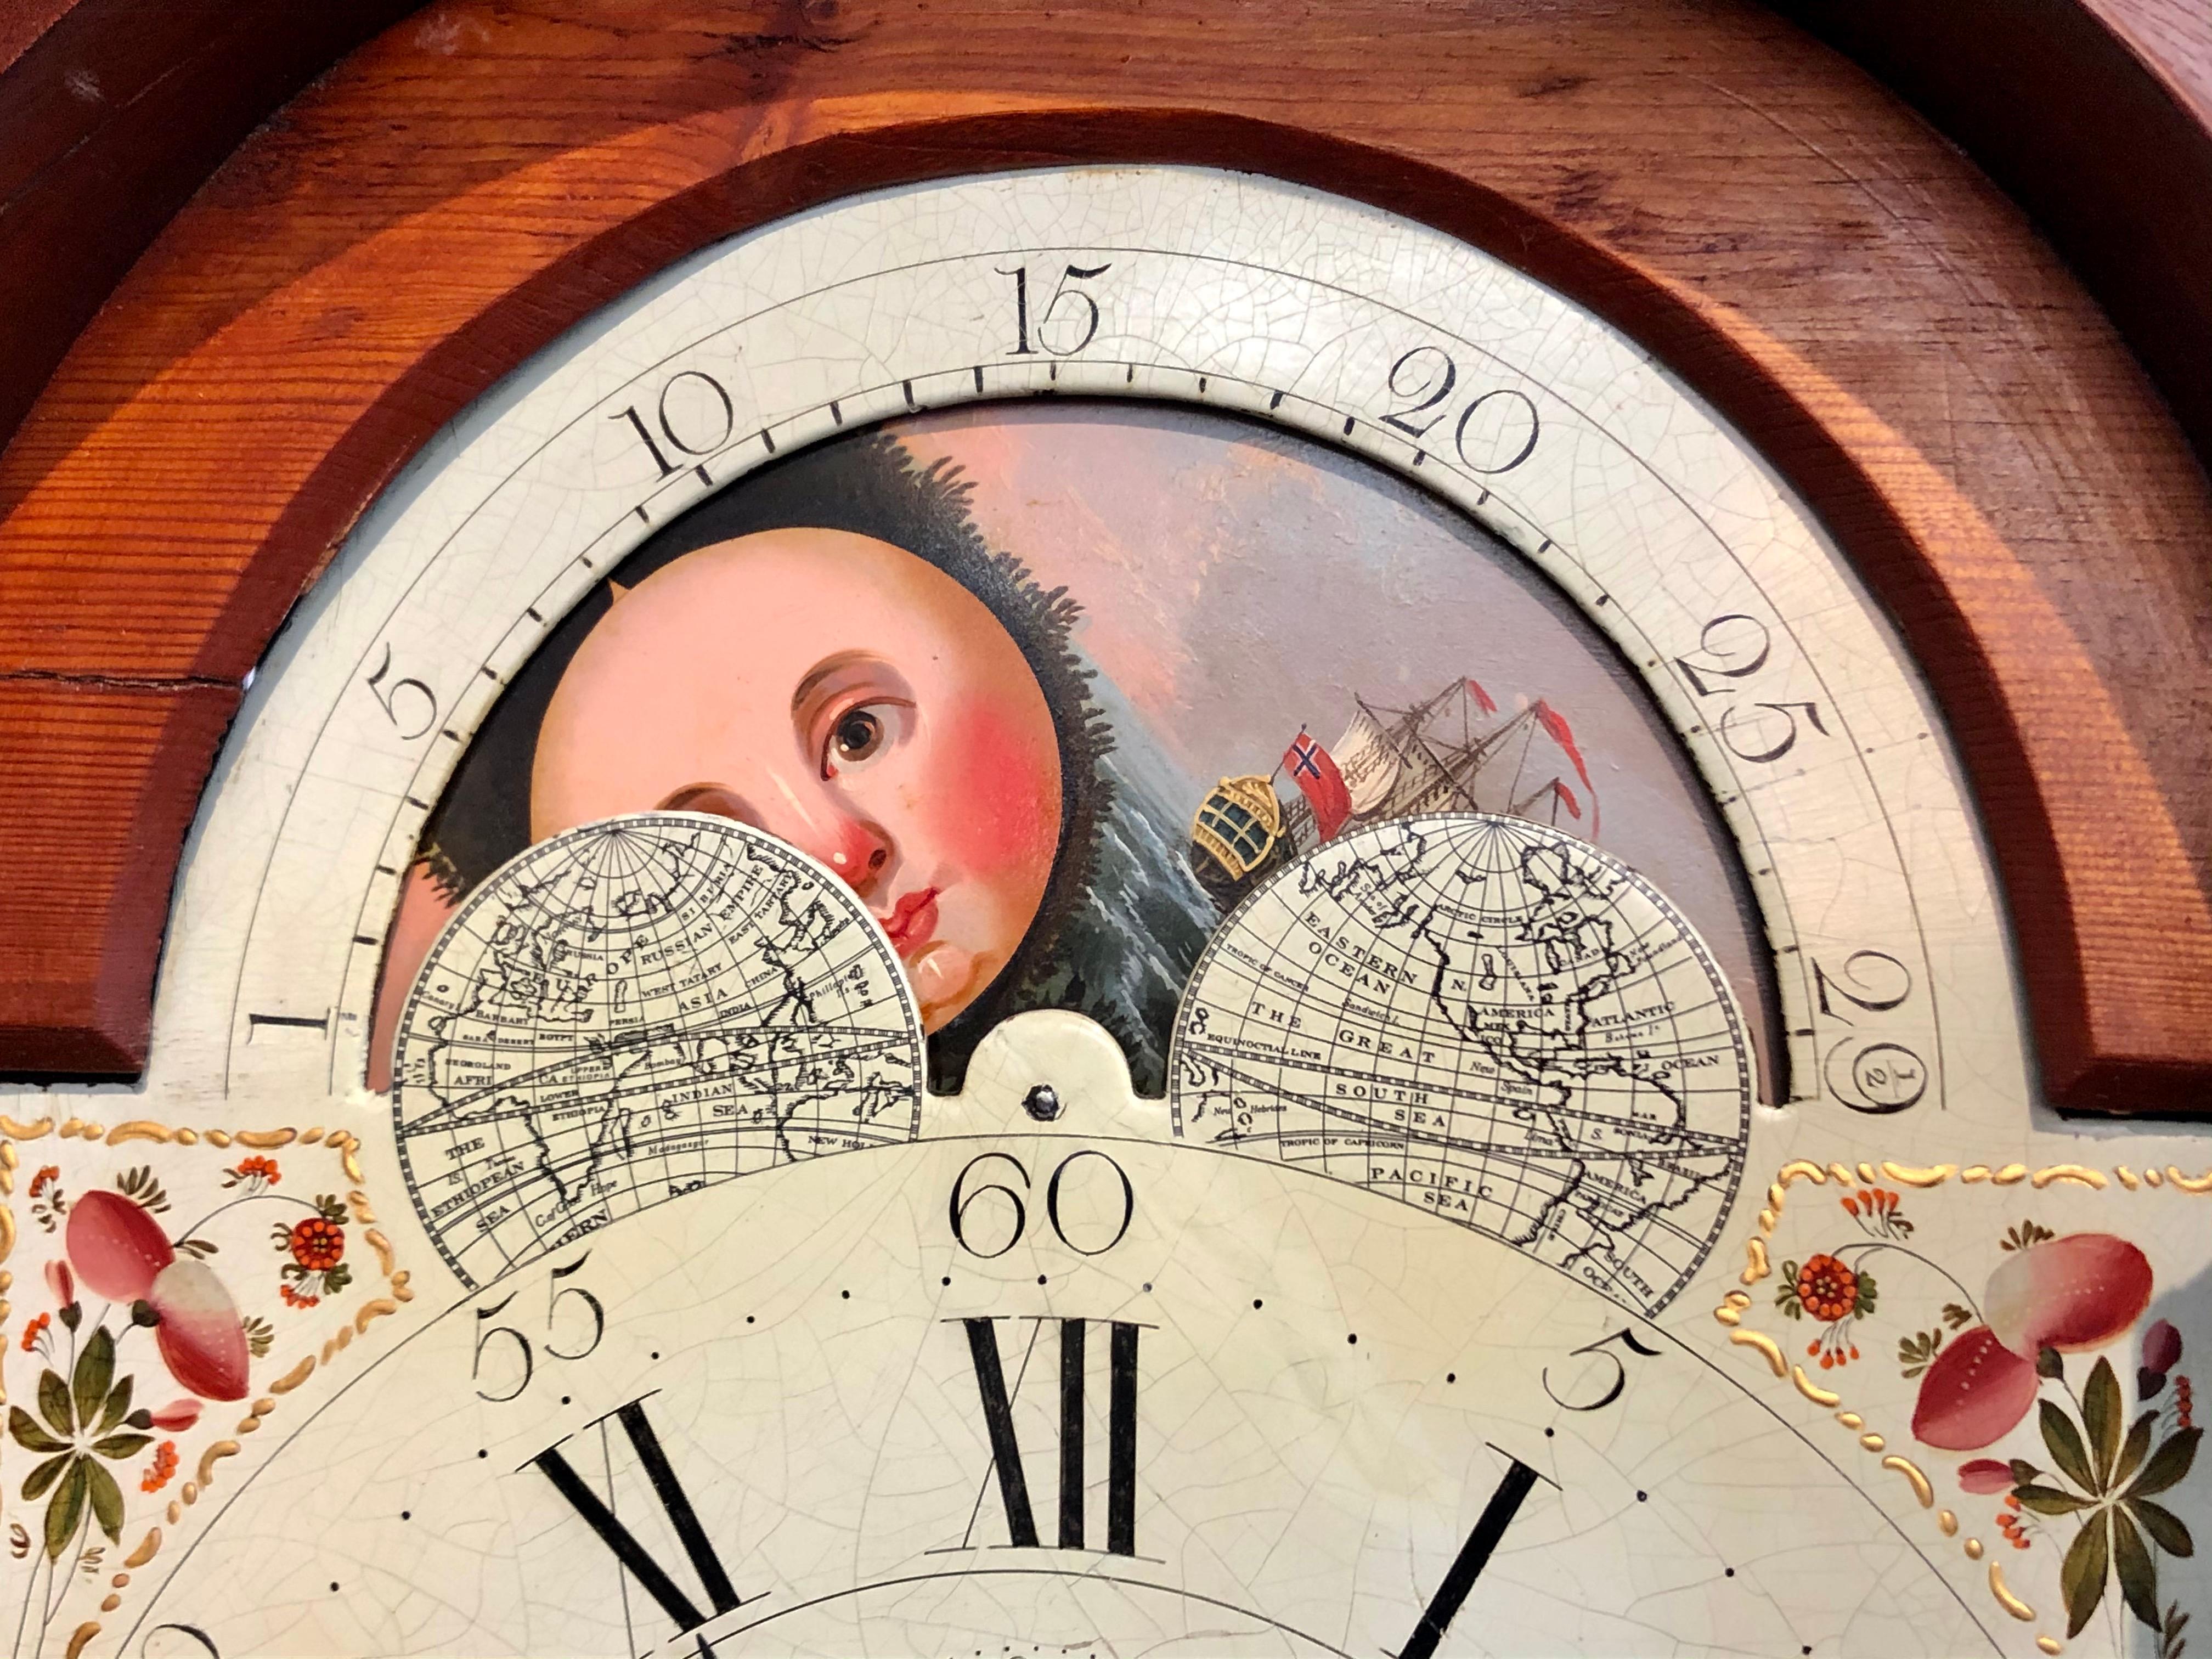 Lovely antique Scottish early 19th century inlaid mahogany painted dial longcase clock with rotating moon phase dial, calendar dial and second hand sweep. Nicely figured case has beautiful inlaid urn and leaf motif on center of waist door. David